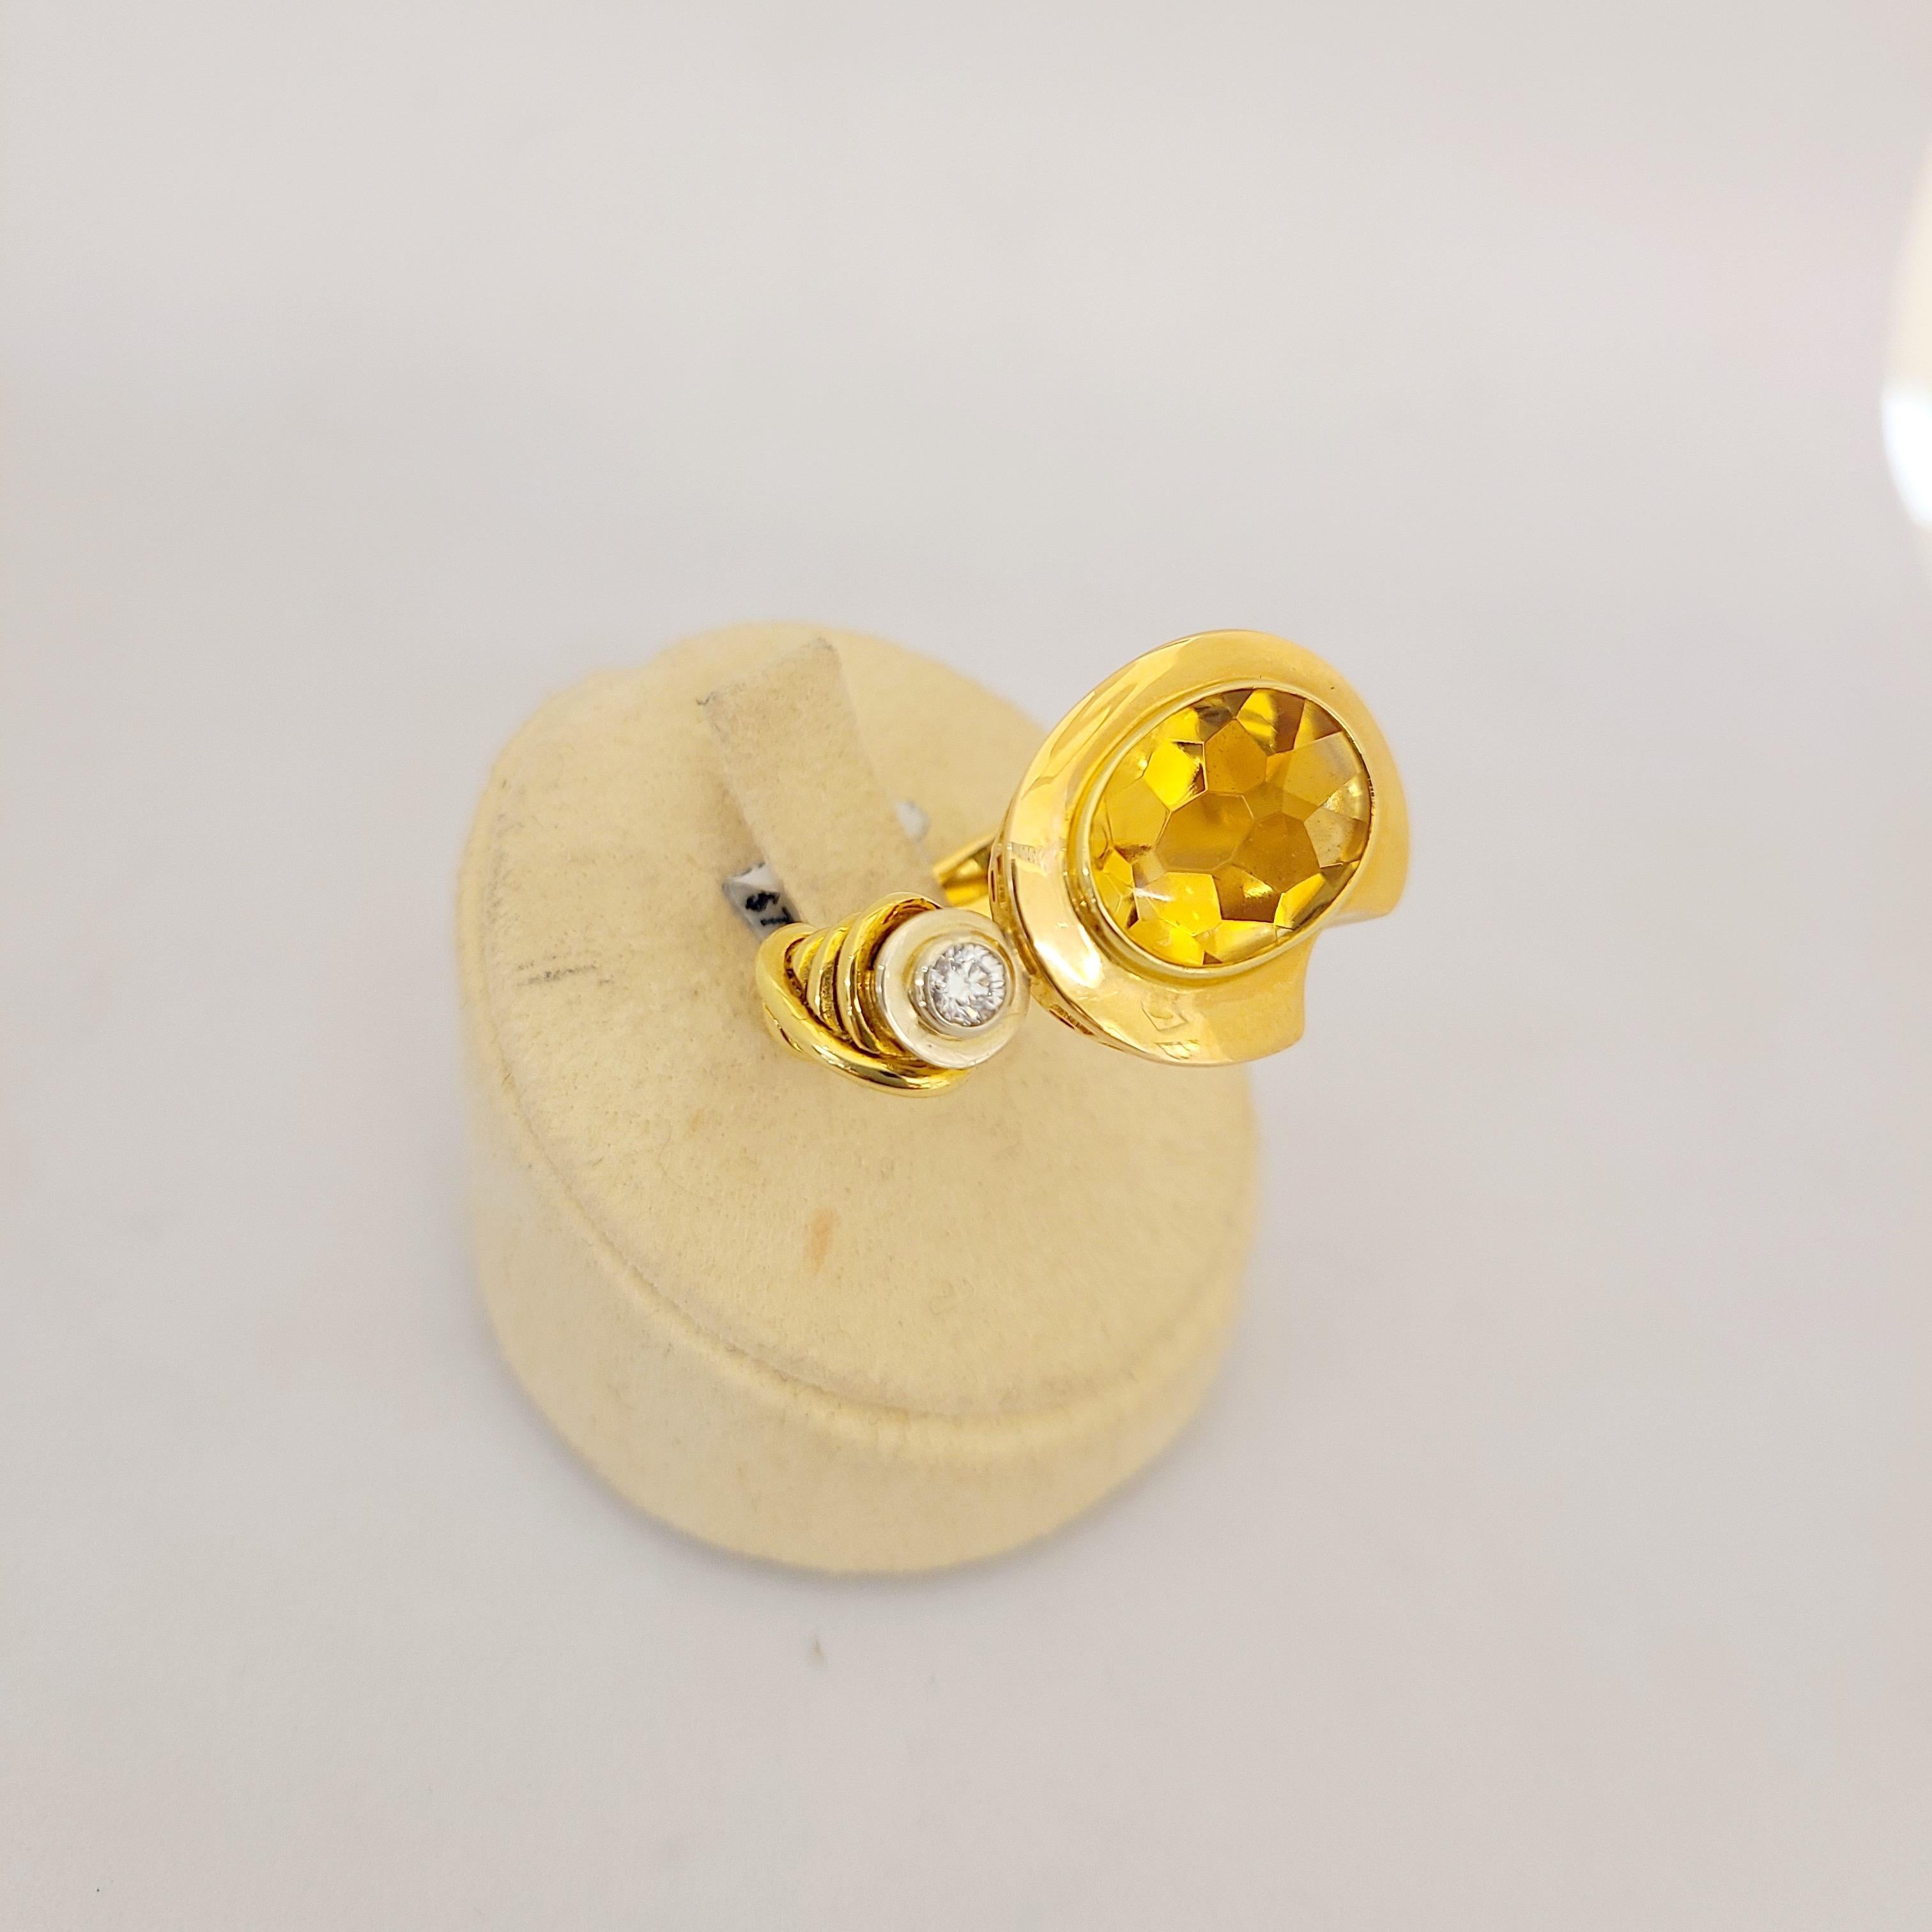 This magnificent  18 karat rose, yellow and white gold ring is designed by the world renowned Italian company La Nouvelle Bague. They are known for their exquisite enamel work,  and their unique signature style marrying the classic with the